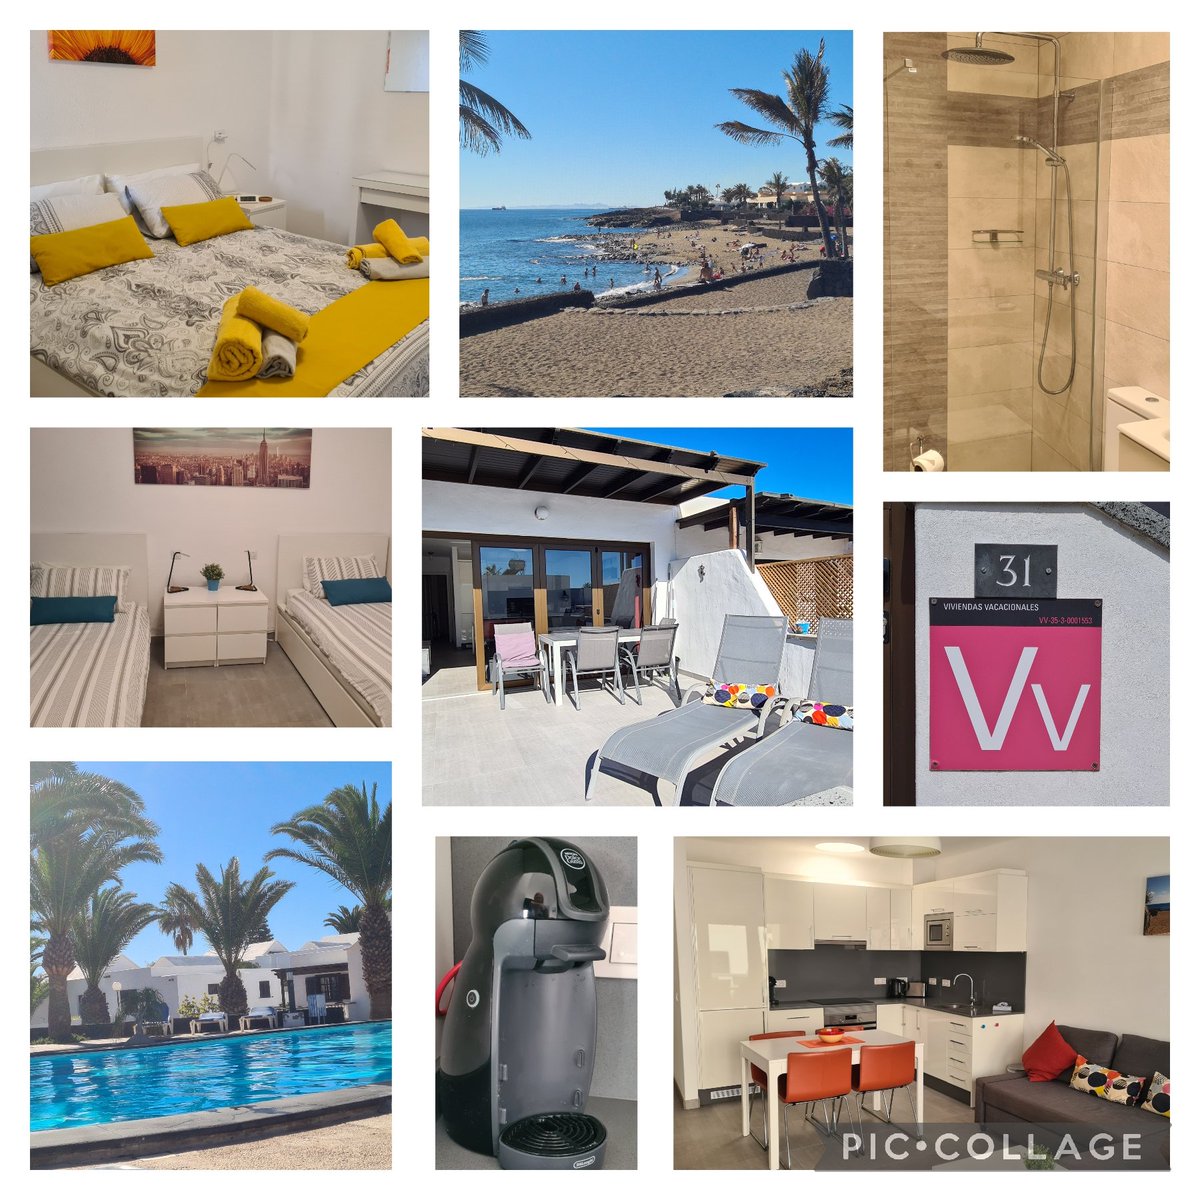 If you're still looking for some sunshine in 2023, you'll need to be quick.  Last remaining availability:

10-24th October
1-16th December 

#lanzarote #costateguise #playabastian #holidaylet #yearroundsun #2bedroom #pool #beach #2023holiday